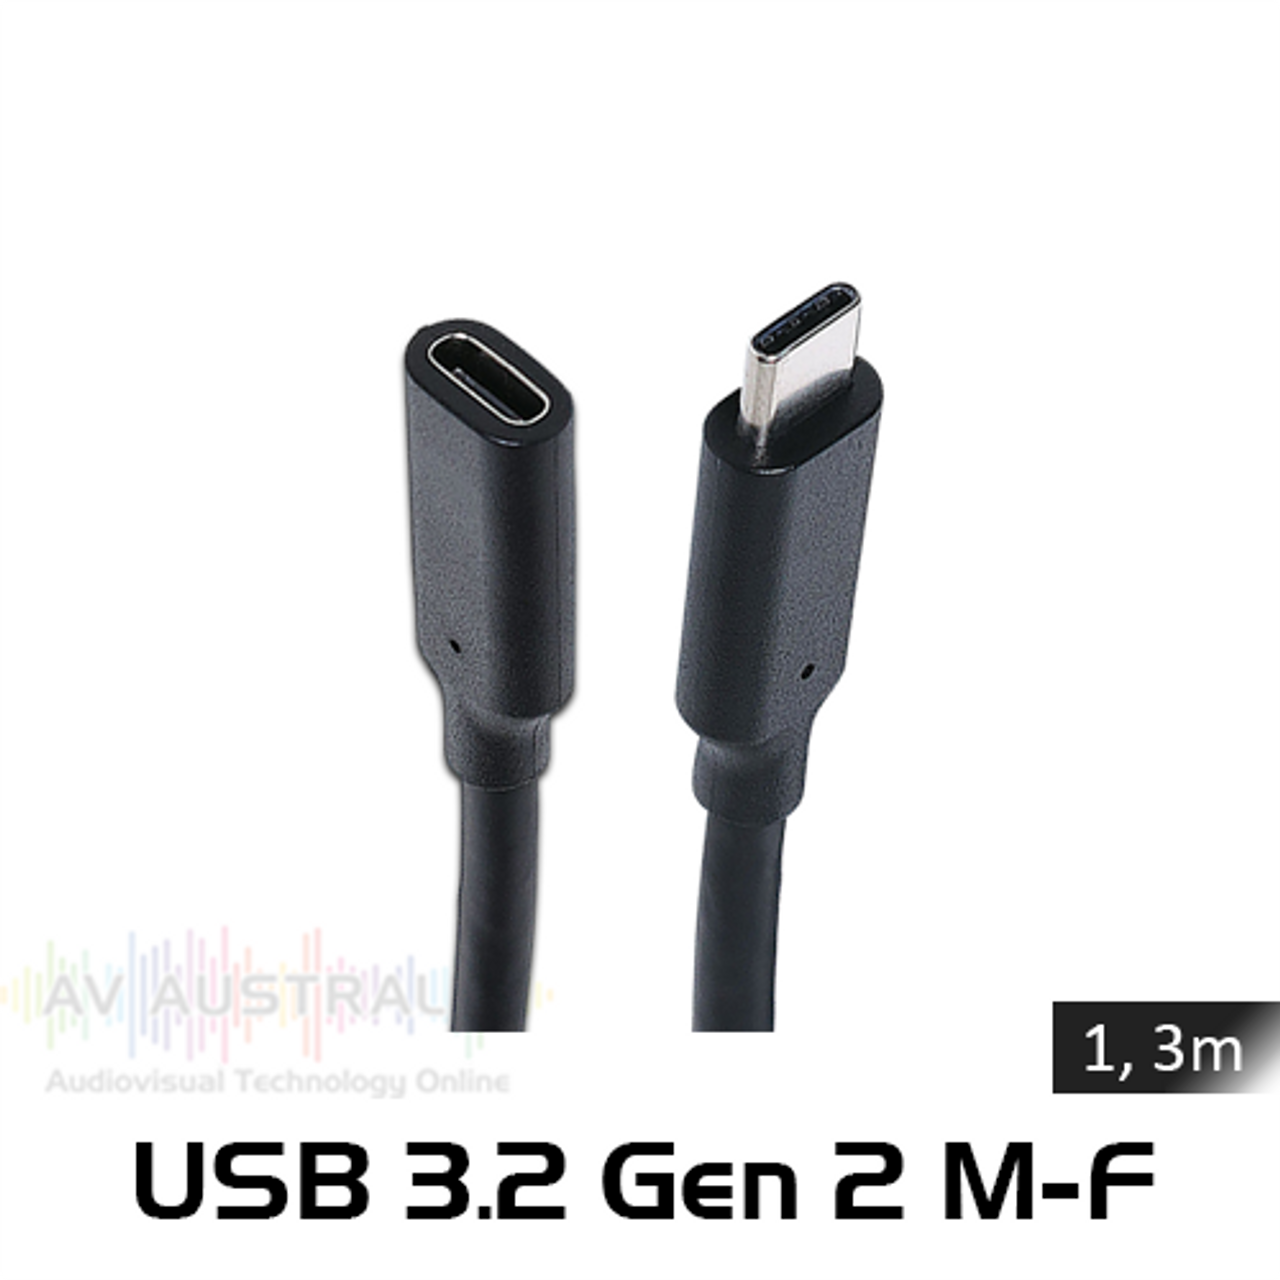  USB 3.2 Gen 2 10Gbps Type C Male-Female Cables (1, 3m)